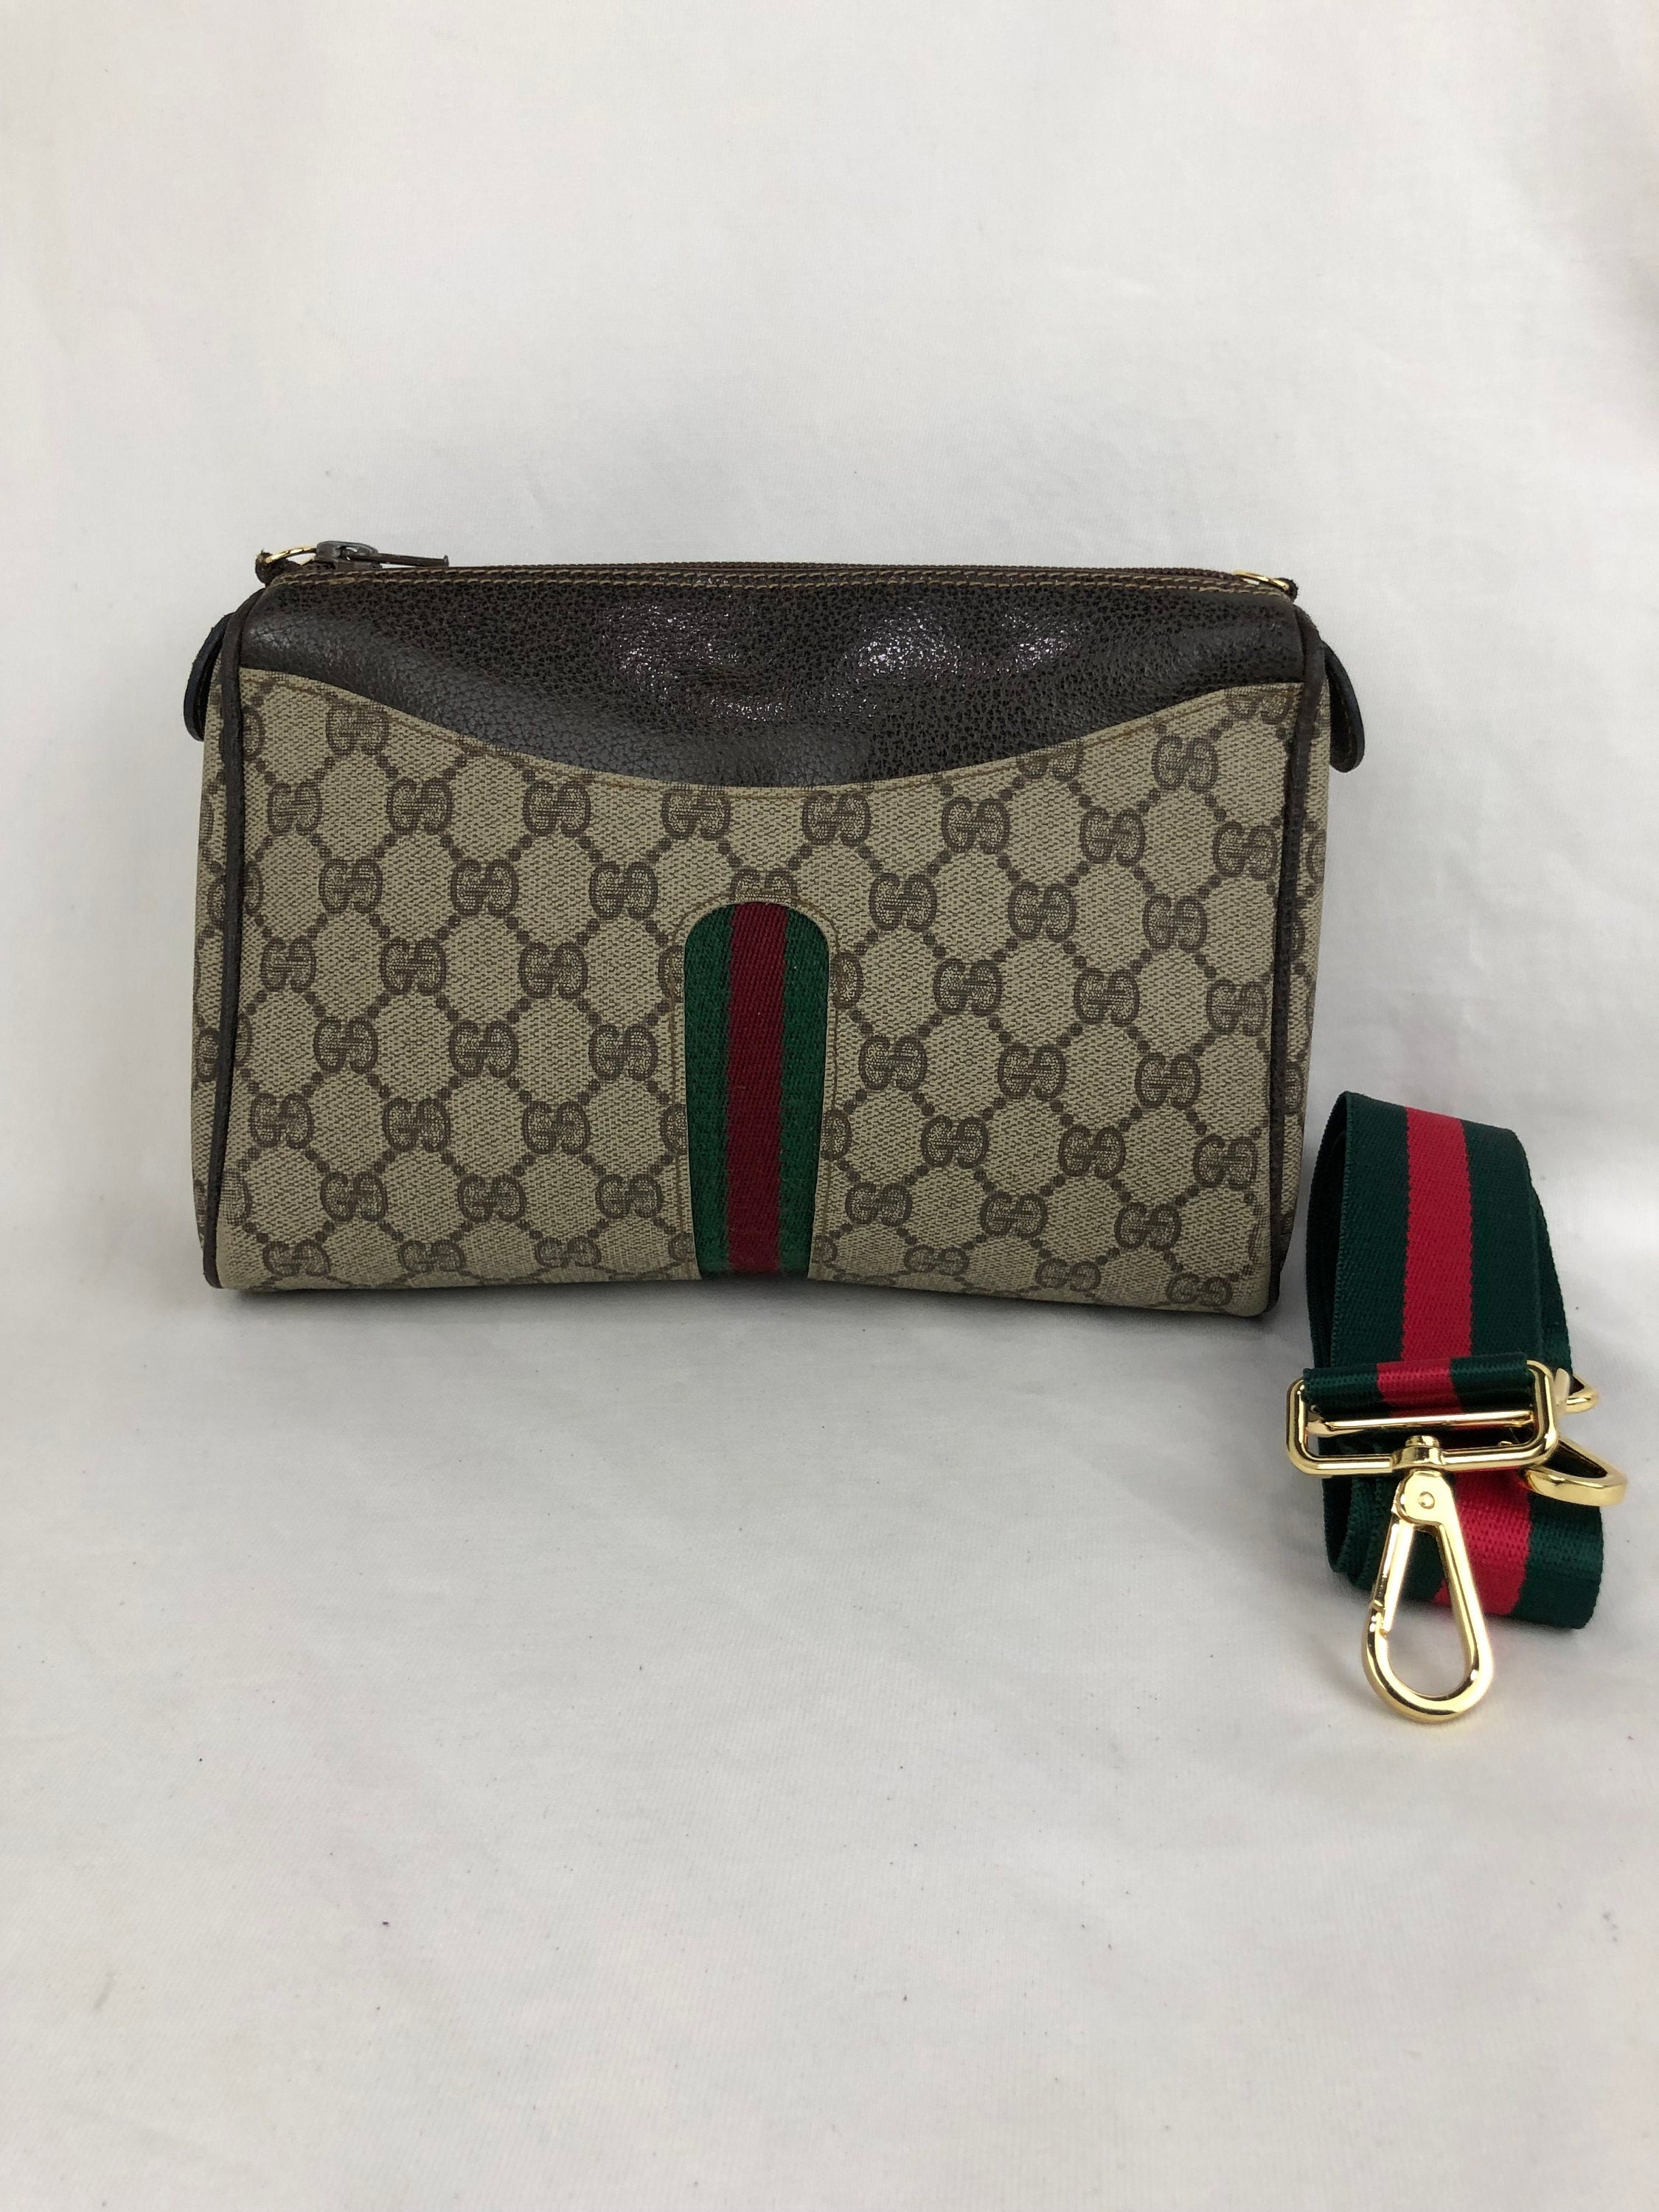 GUCCI Bags For Men